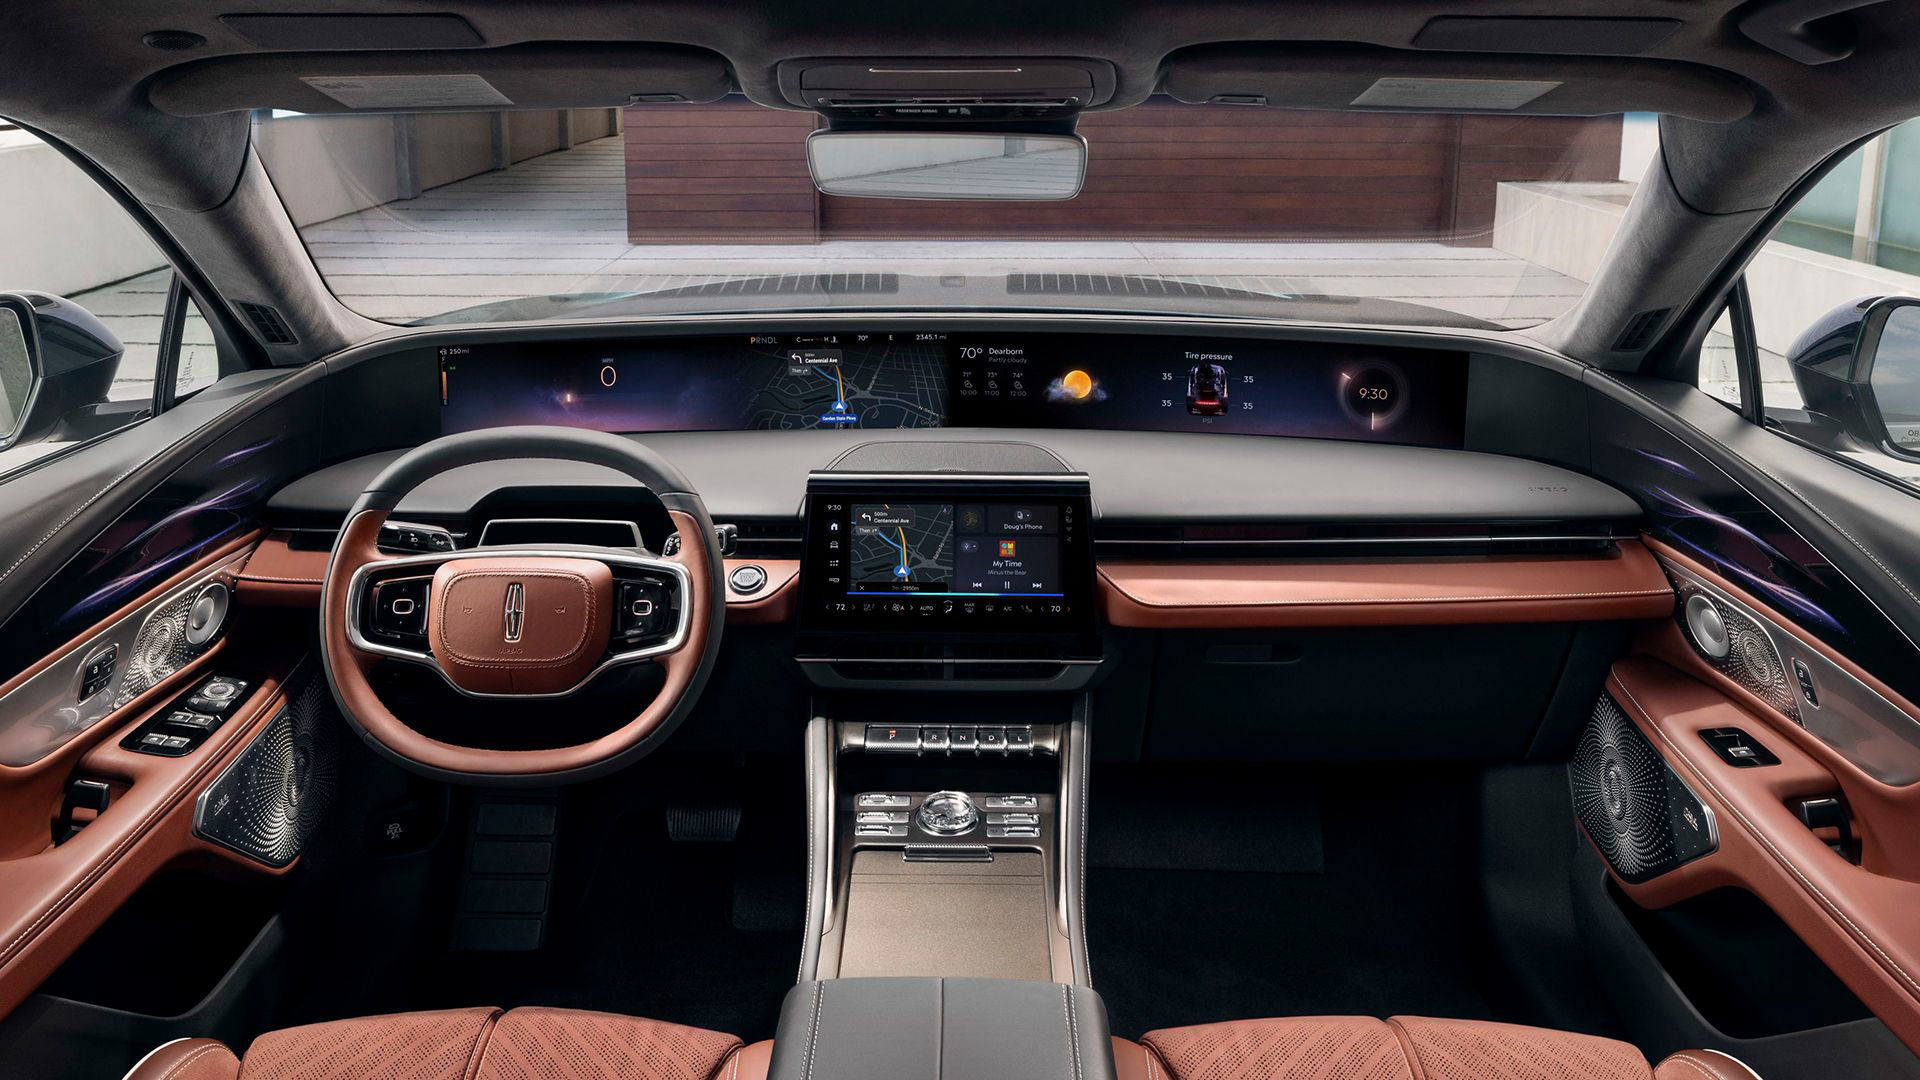 Ford shows off its new infotainment system in the Lincoln Nautilus